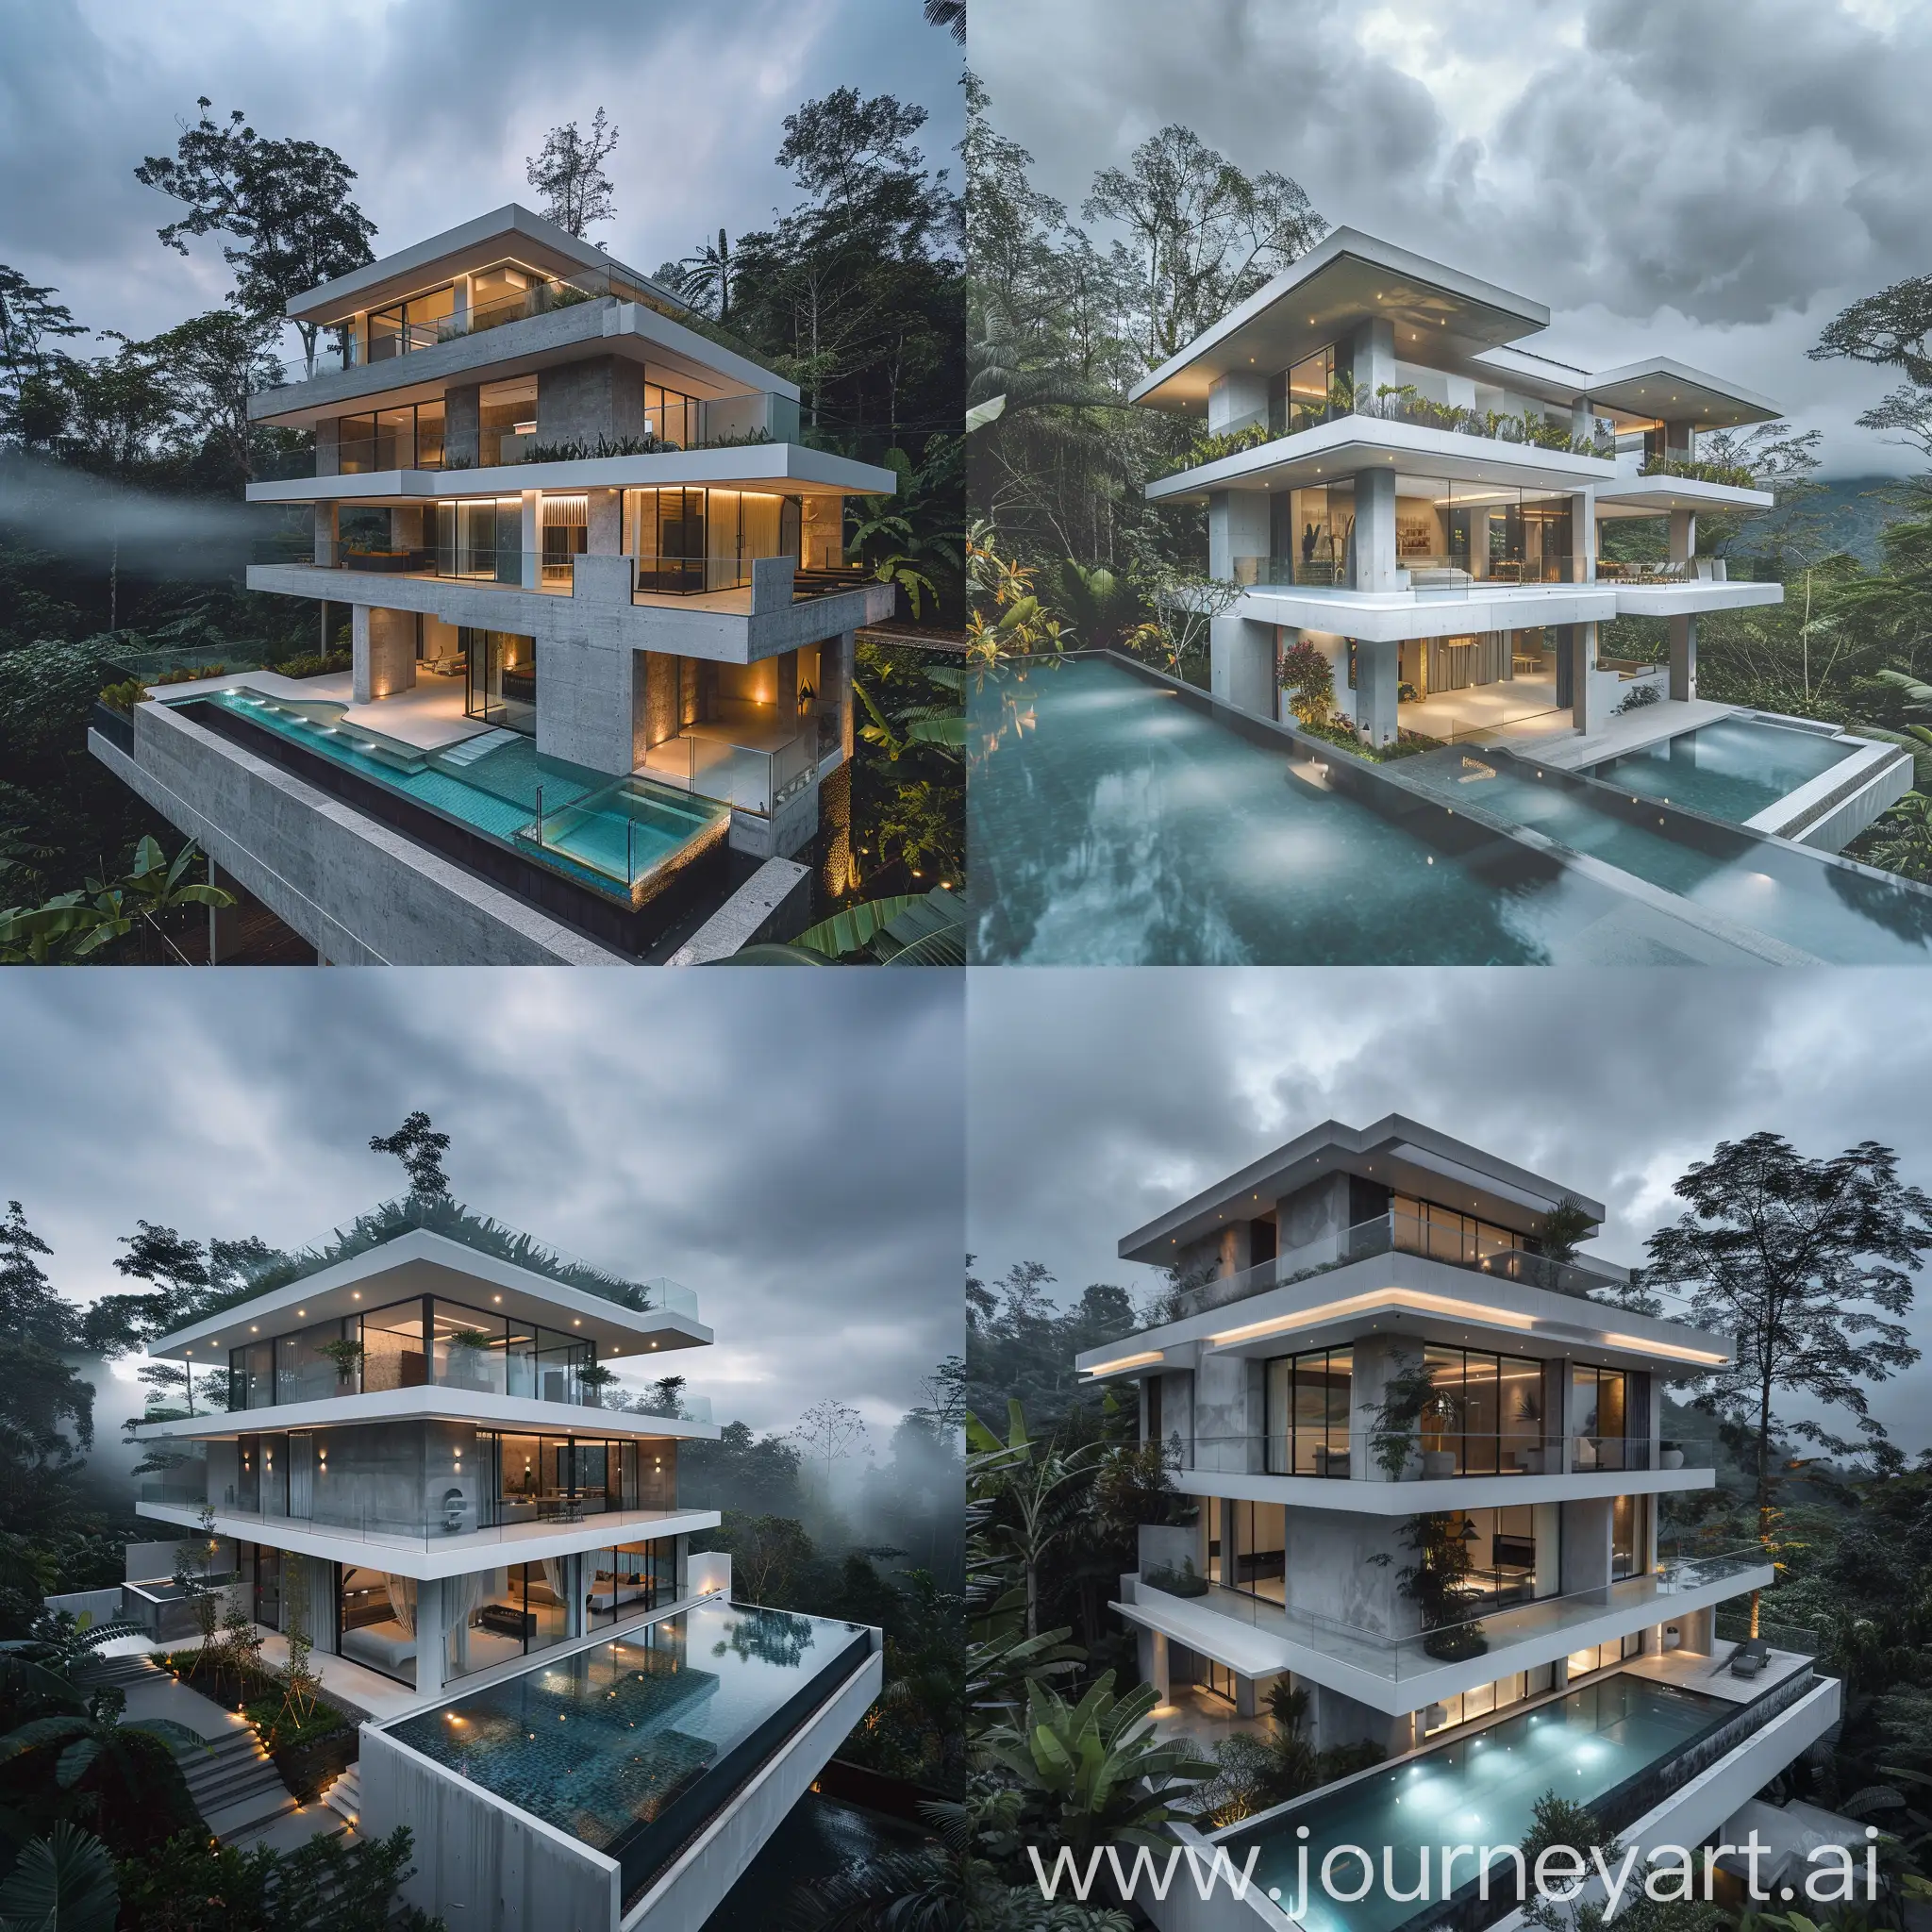 A three-story white and gray concrete villa with a glass infinity pool, soft lighting, landscaped, in a tropical forest with cloudy weather, real photo